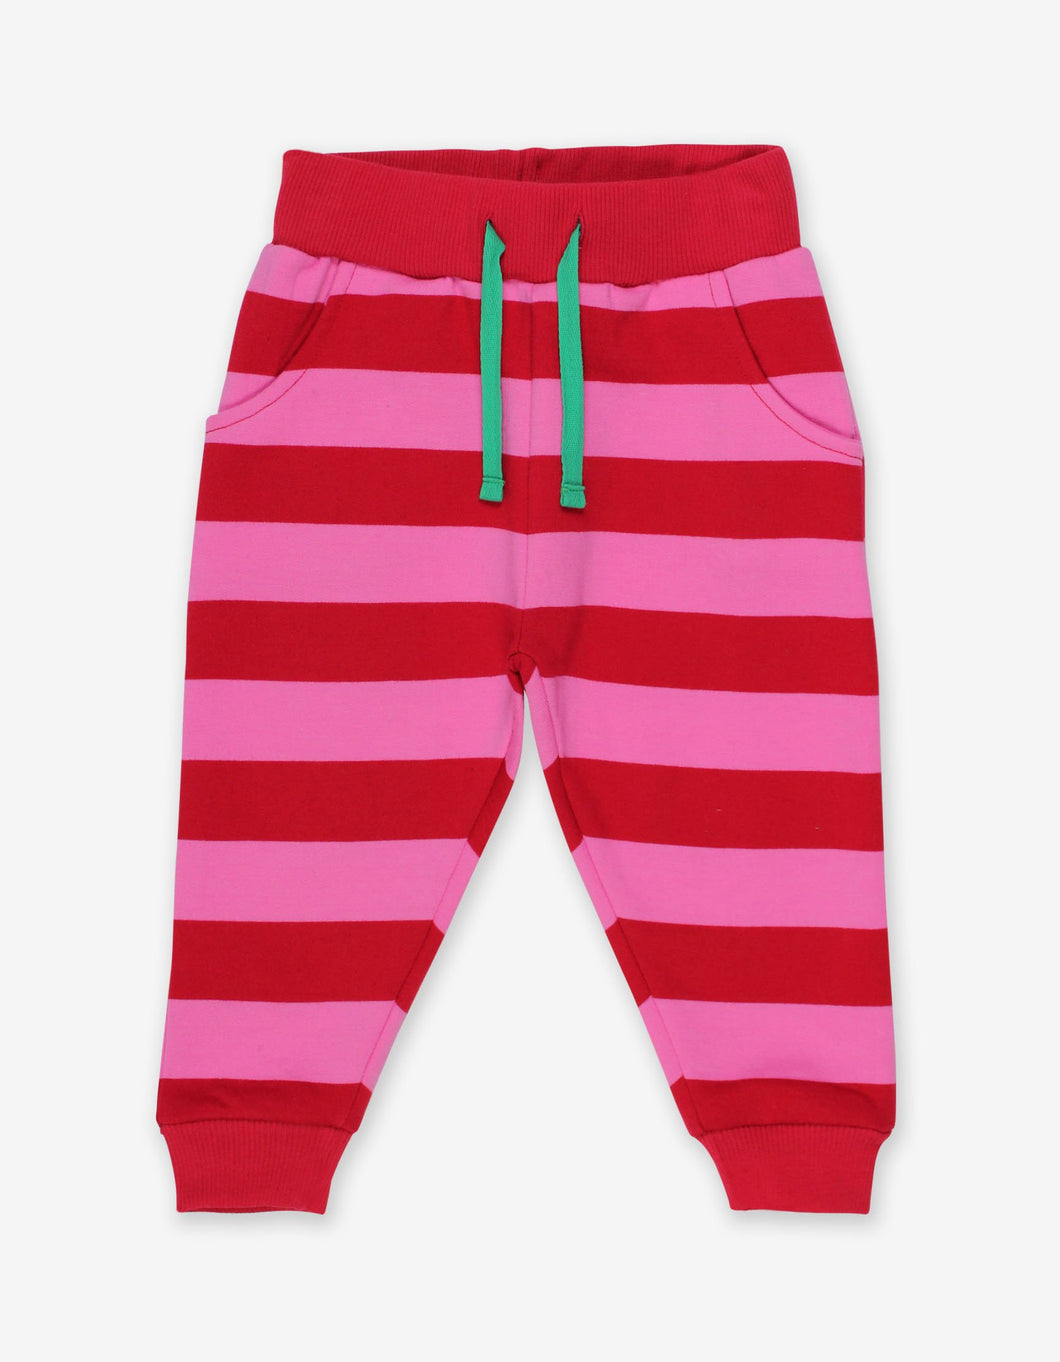 Striped baby pants made from organic cotton, pink and red stripes